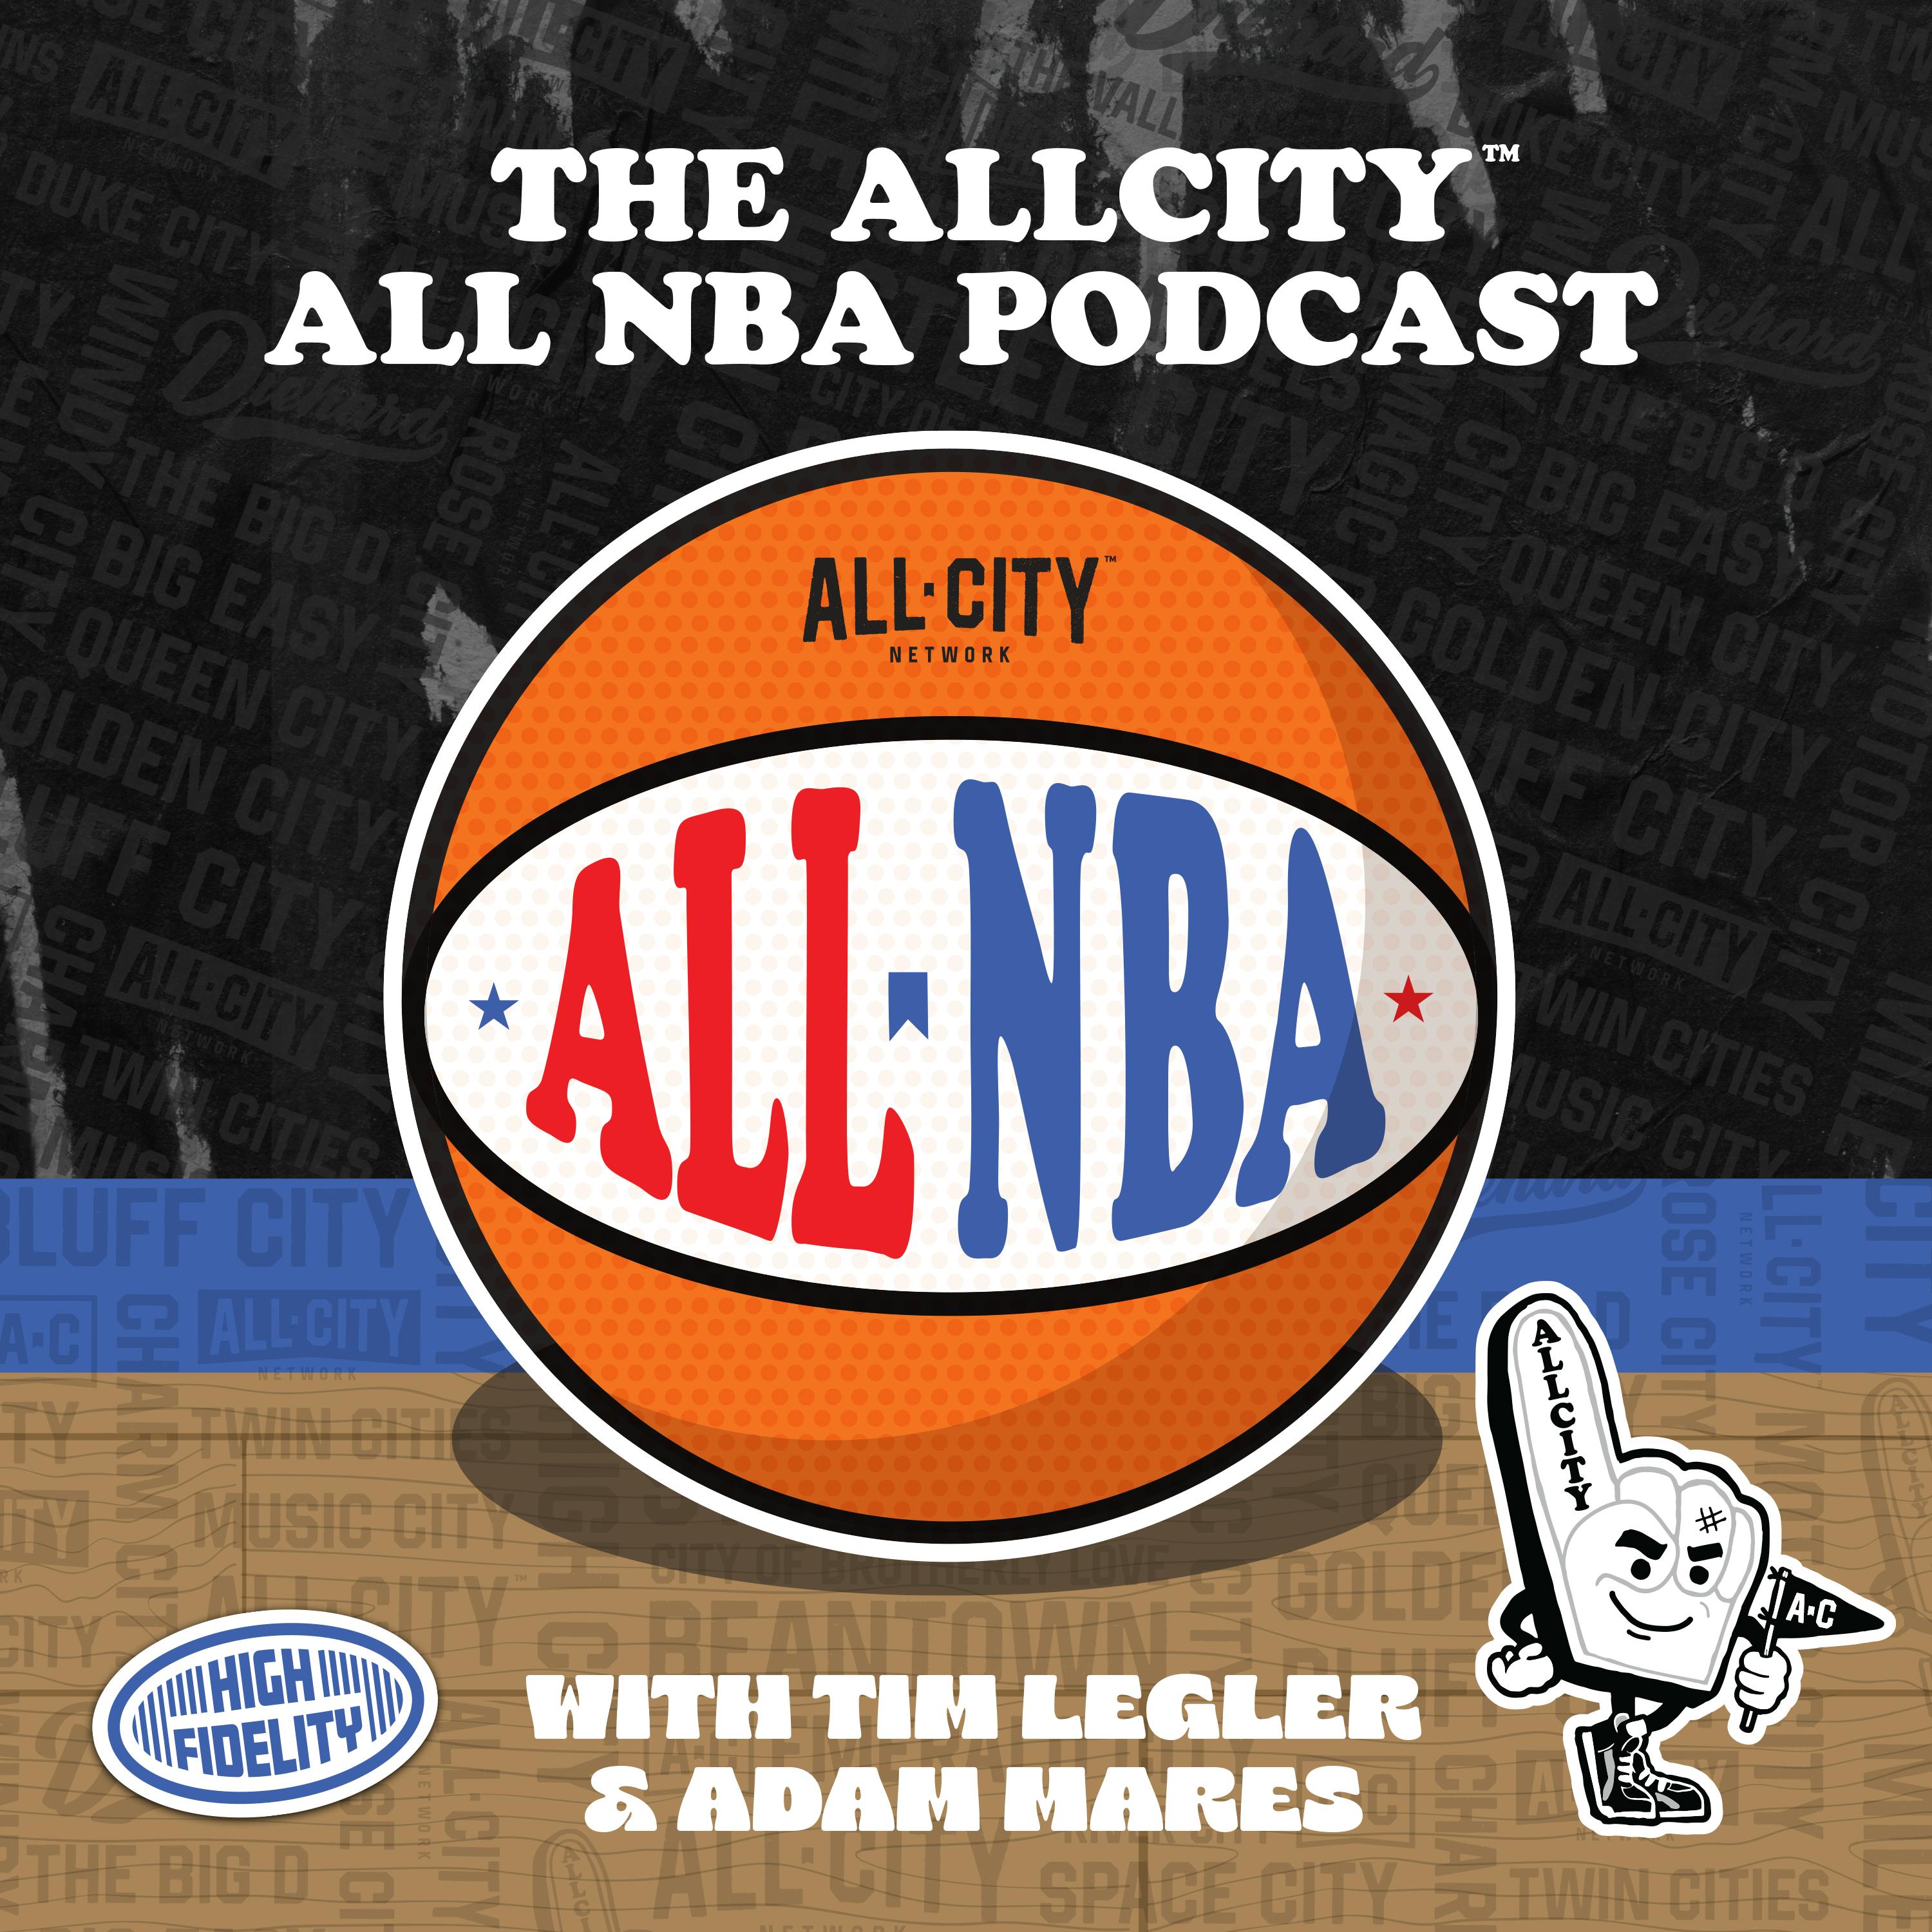 The ALL NBA Podcast: Tim Legler’s Stock Report for every team in the NBA playoffs